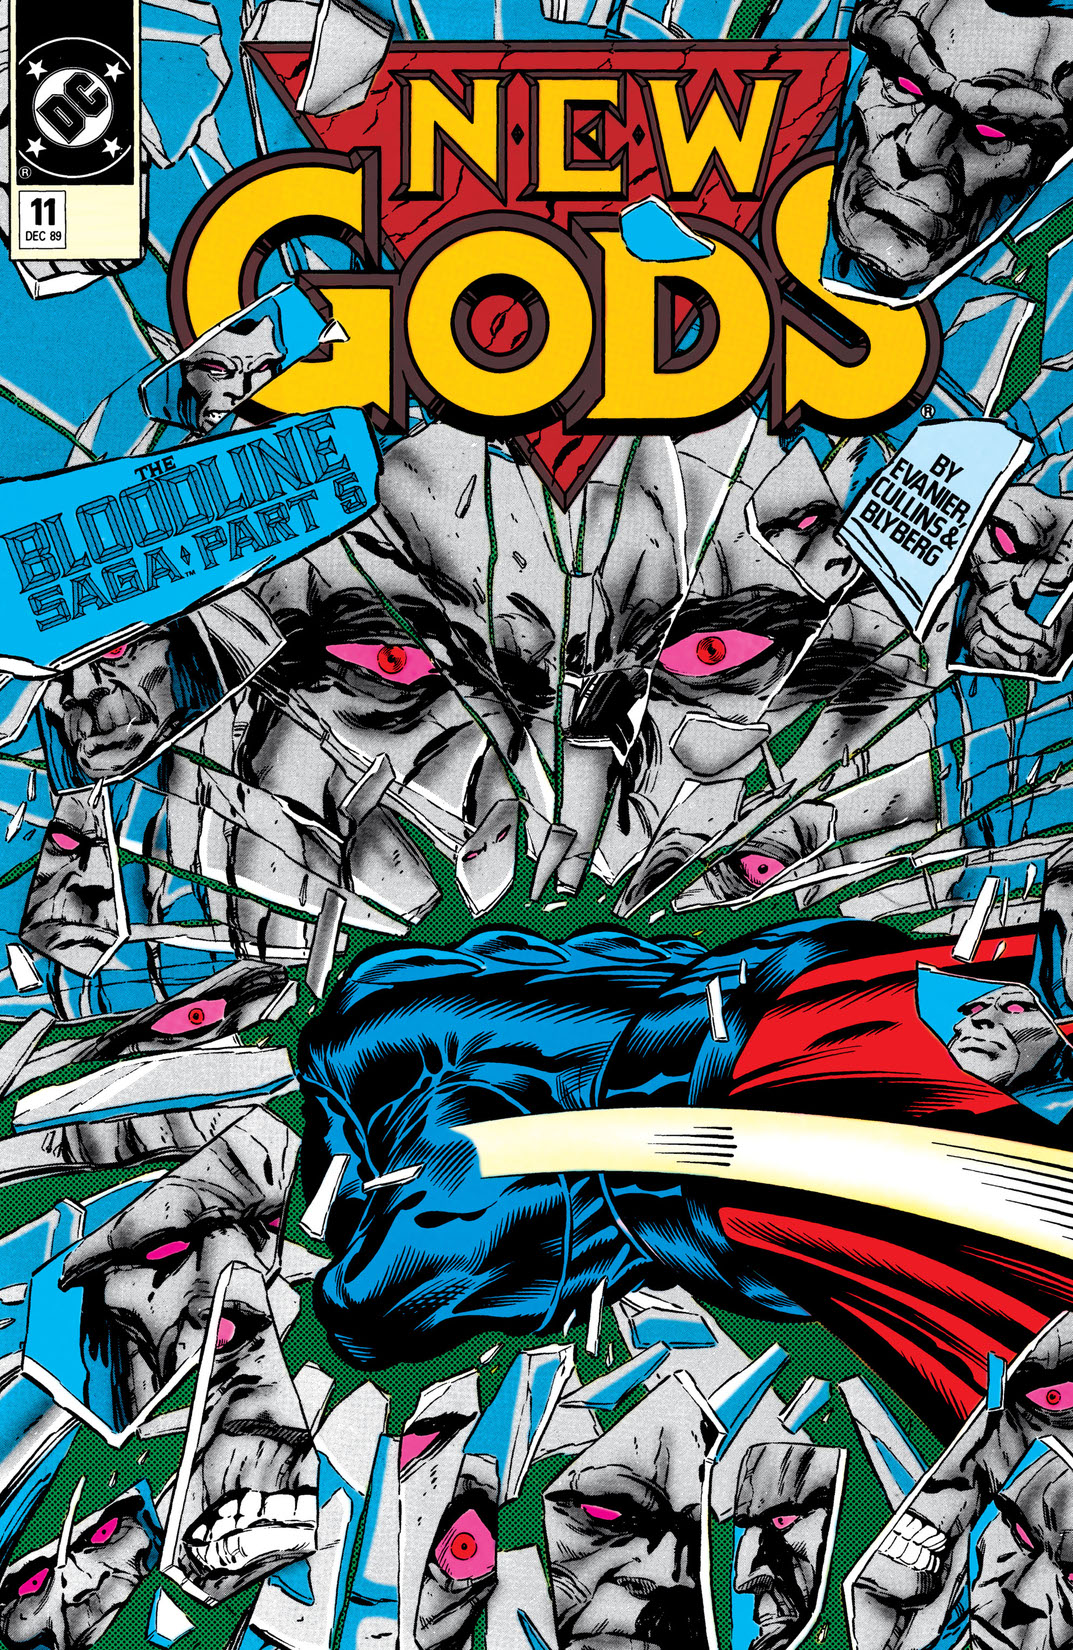 New Gods (1989-) #11 preview images